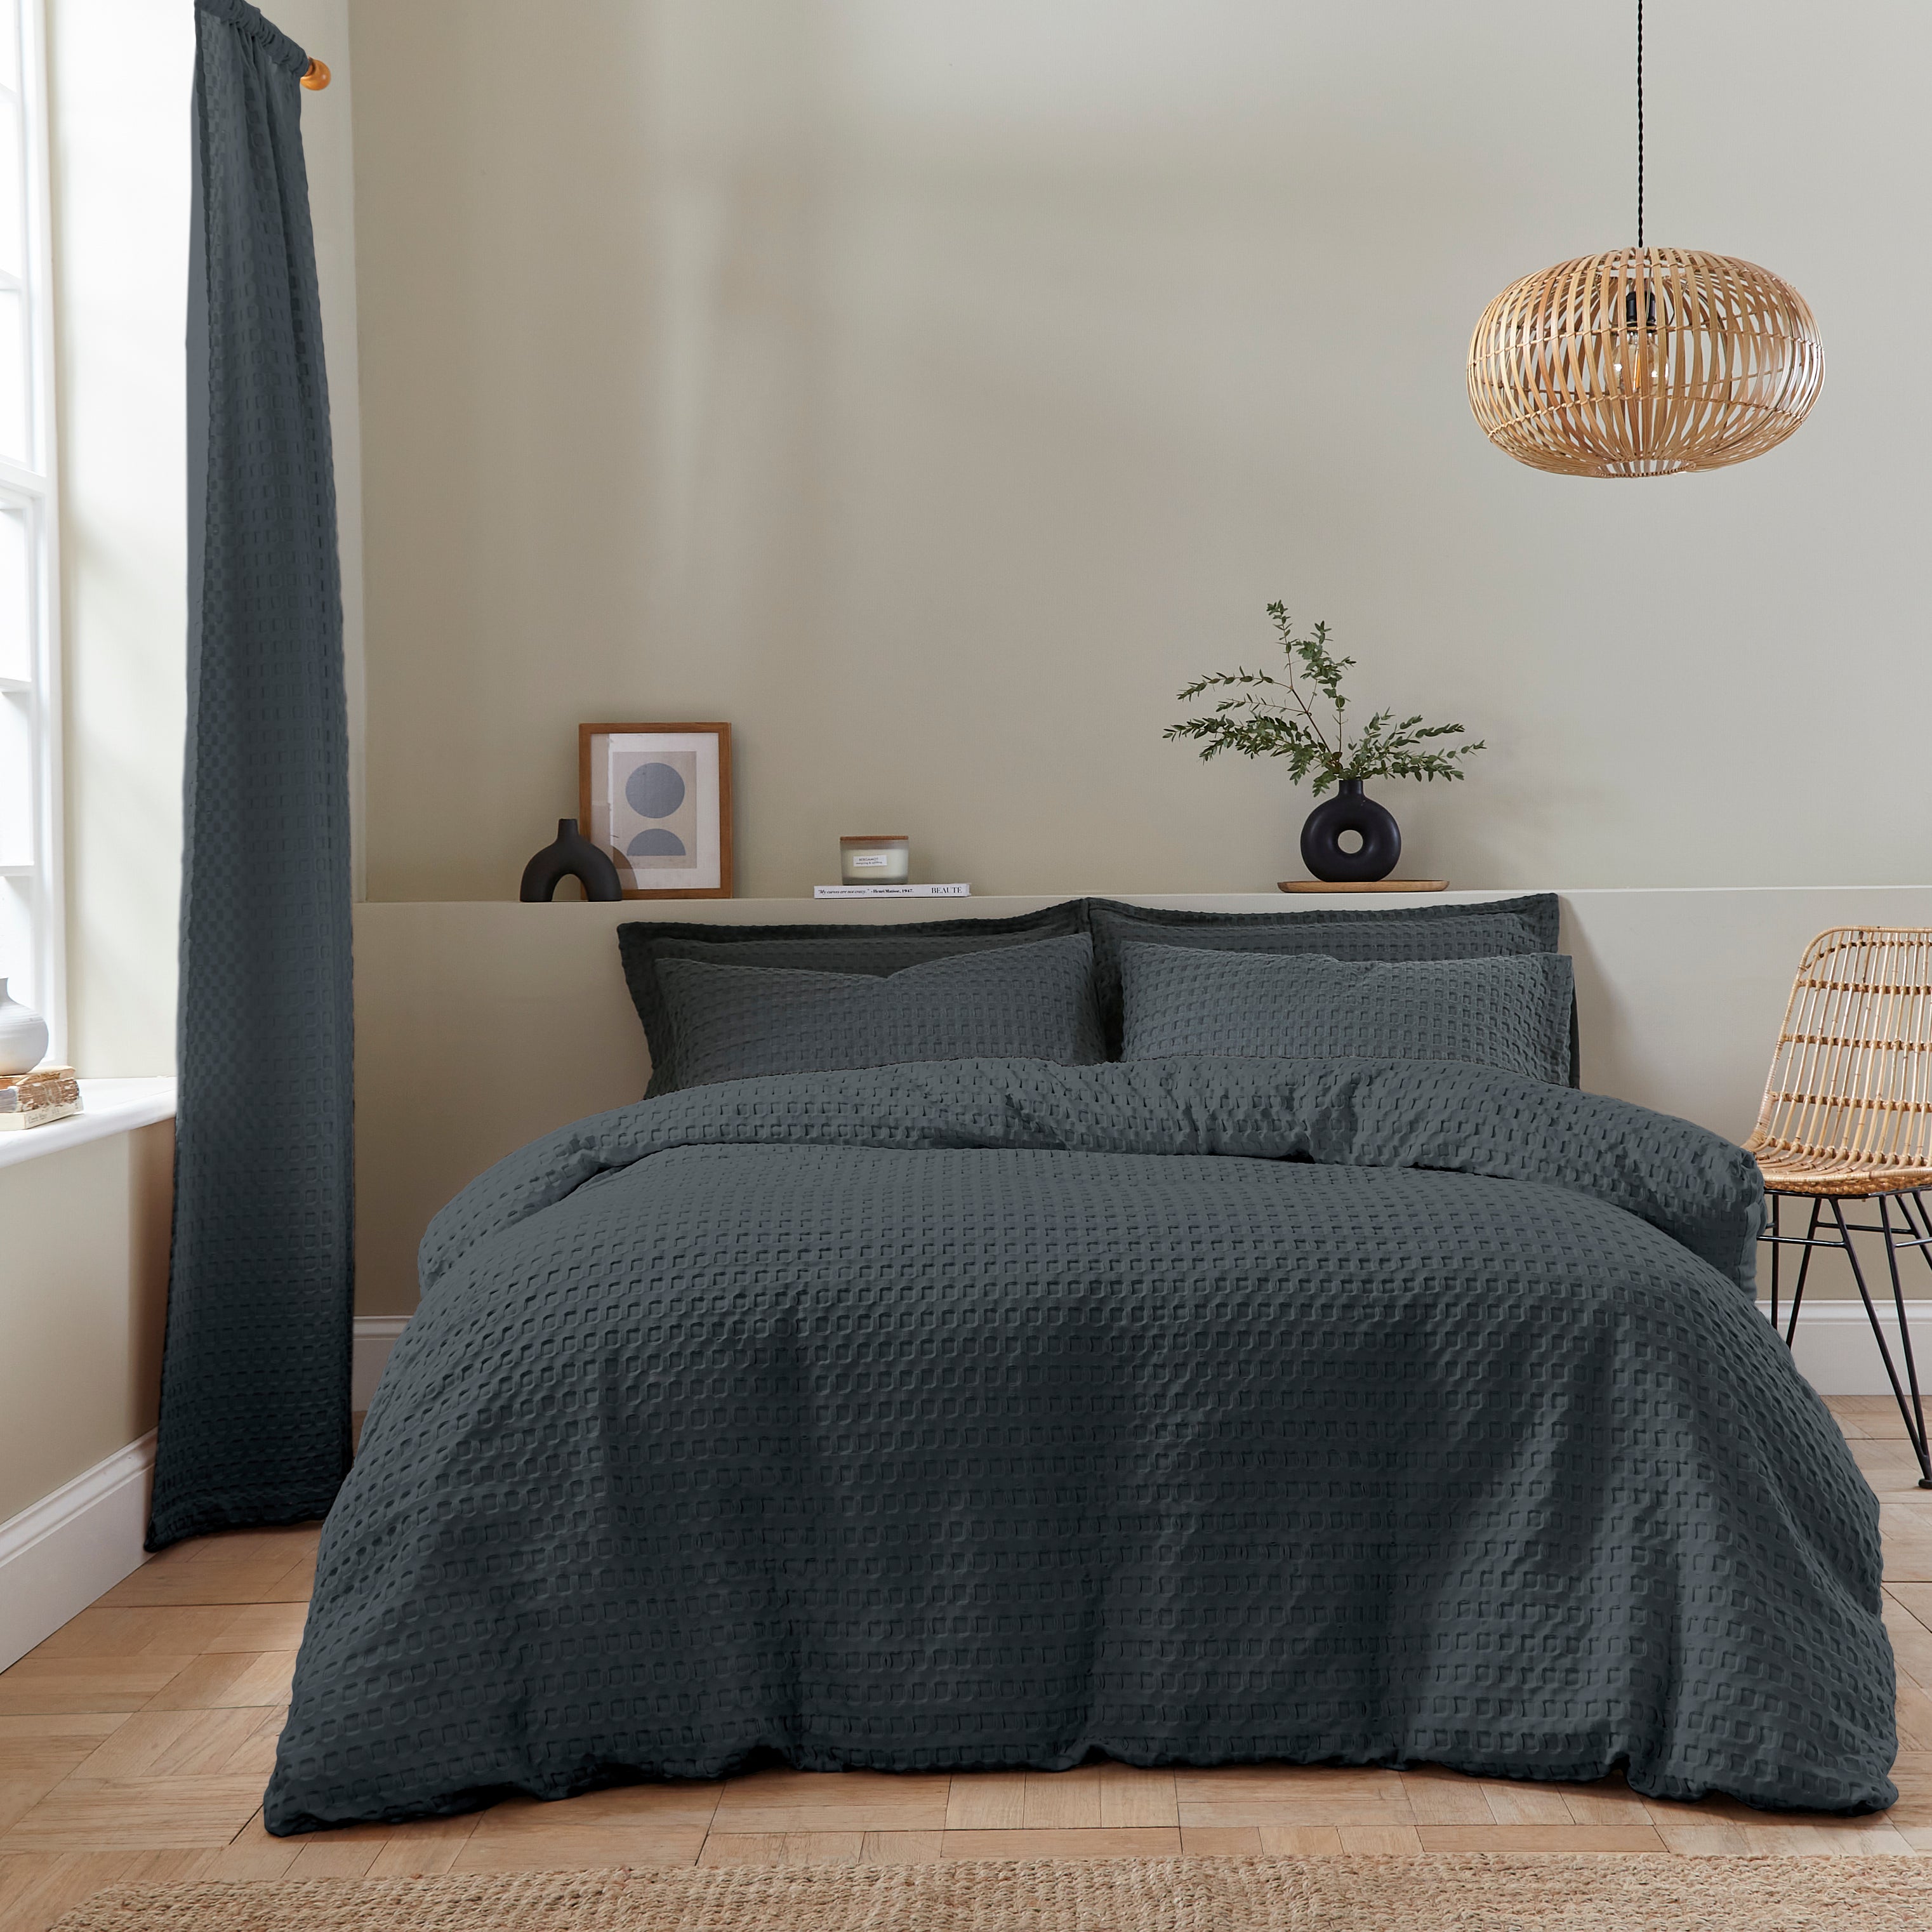 Emerson Waffle Duvet Cover And Pillowcase Set Charcoal Grey